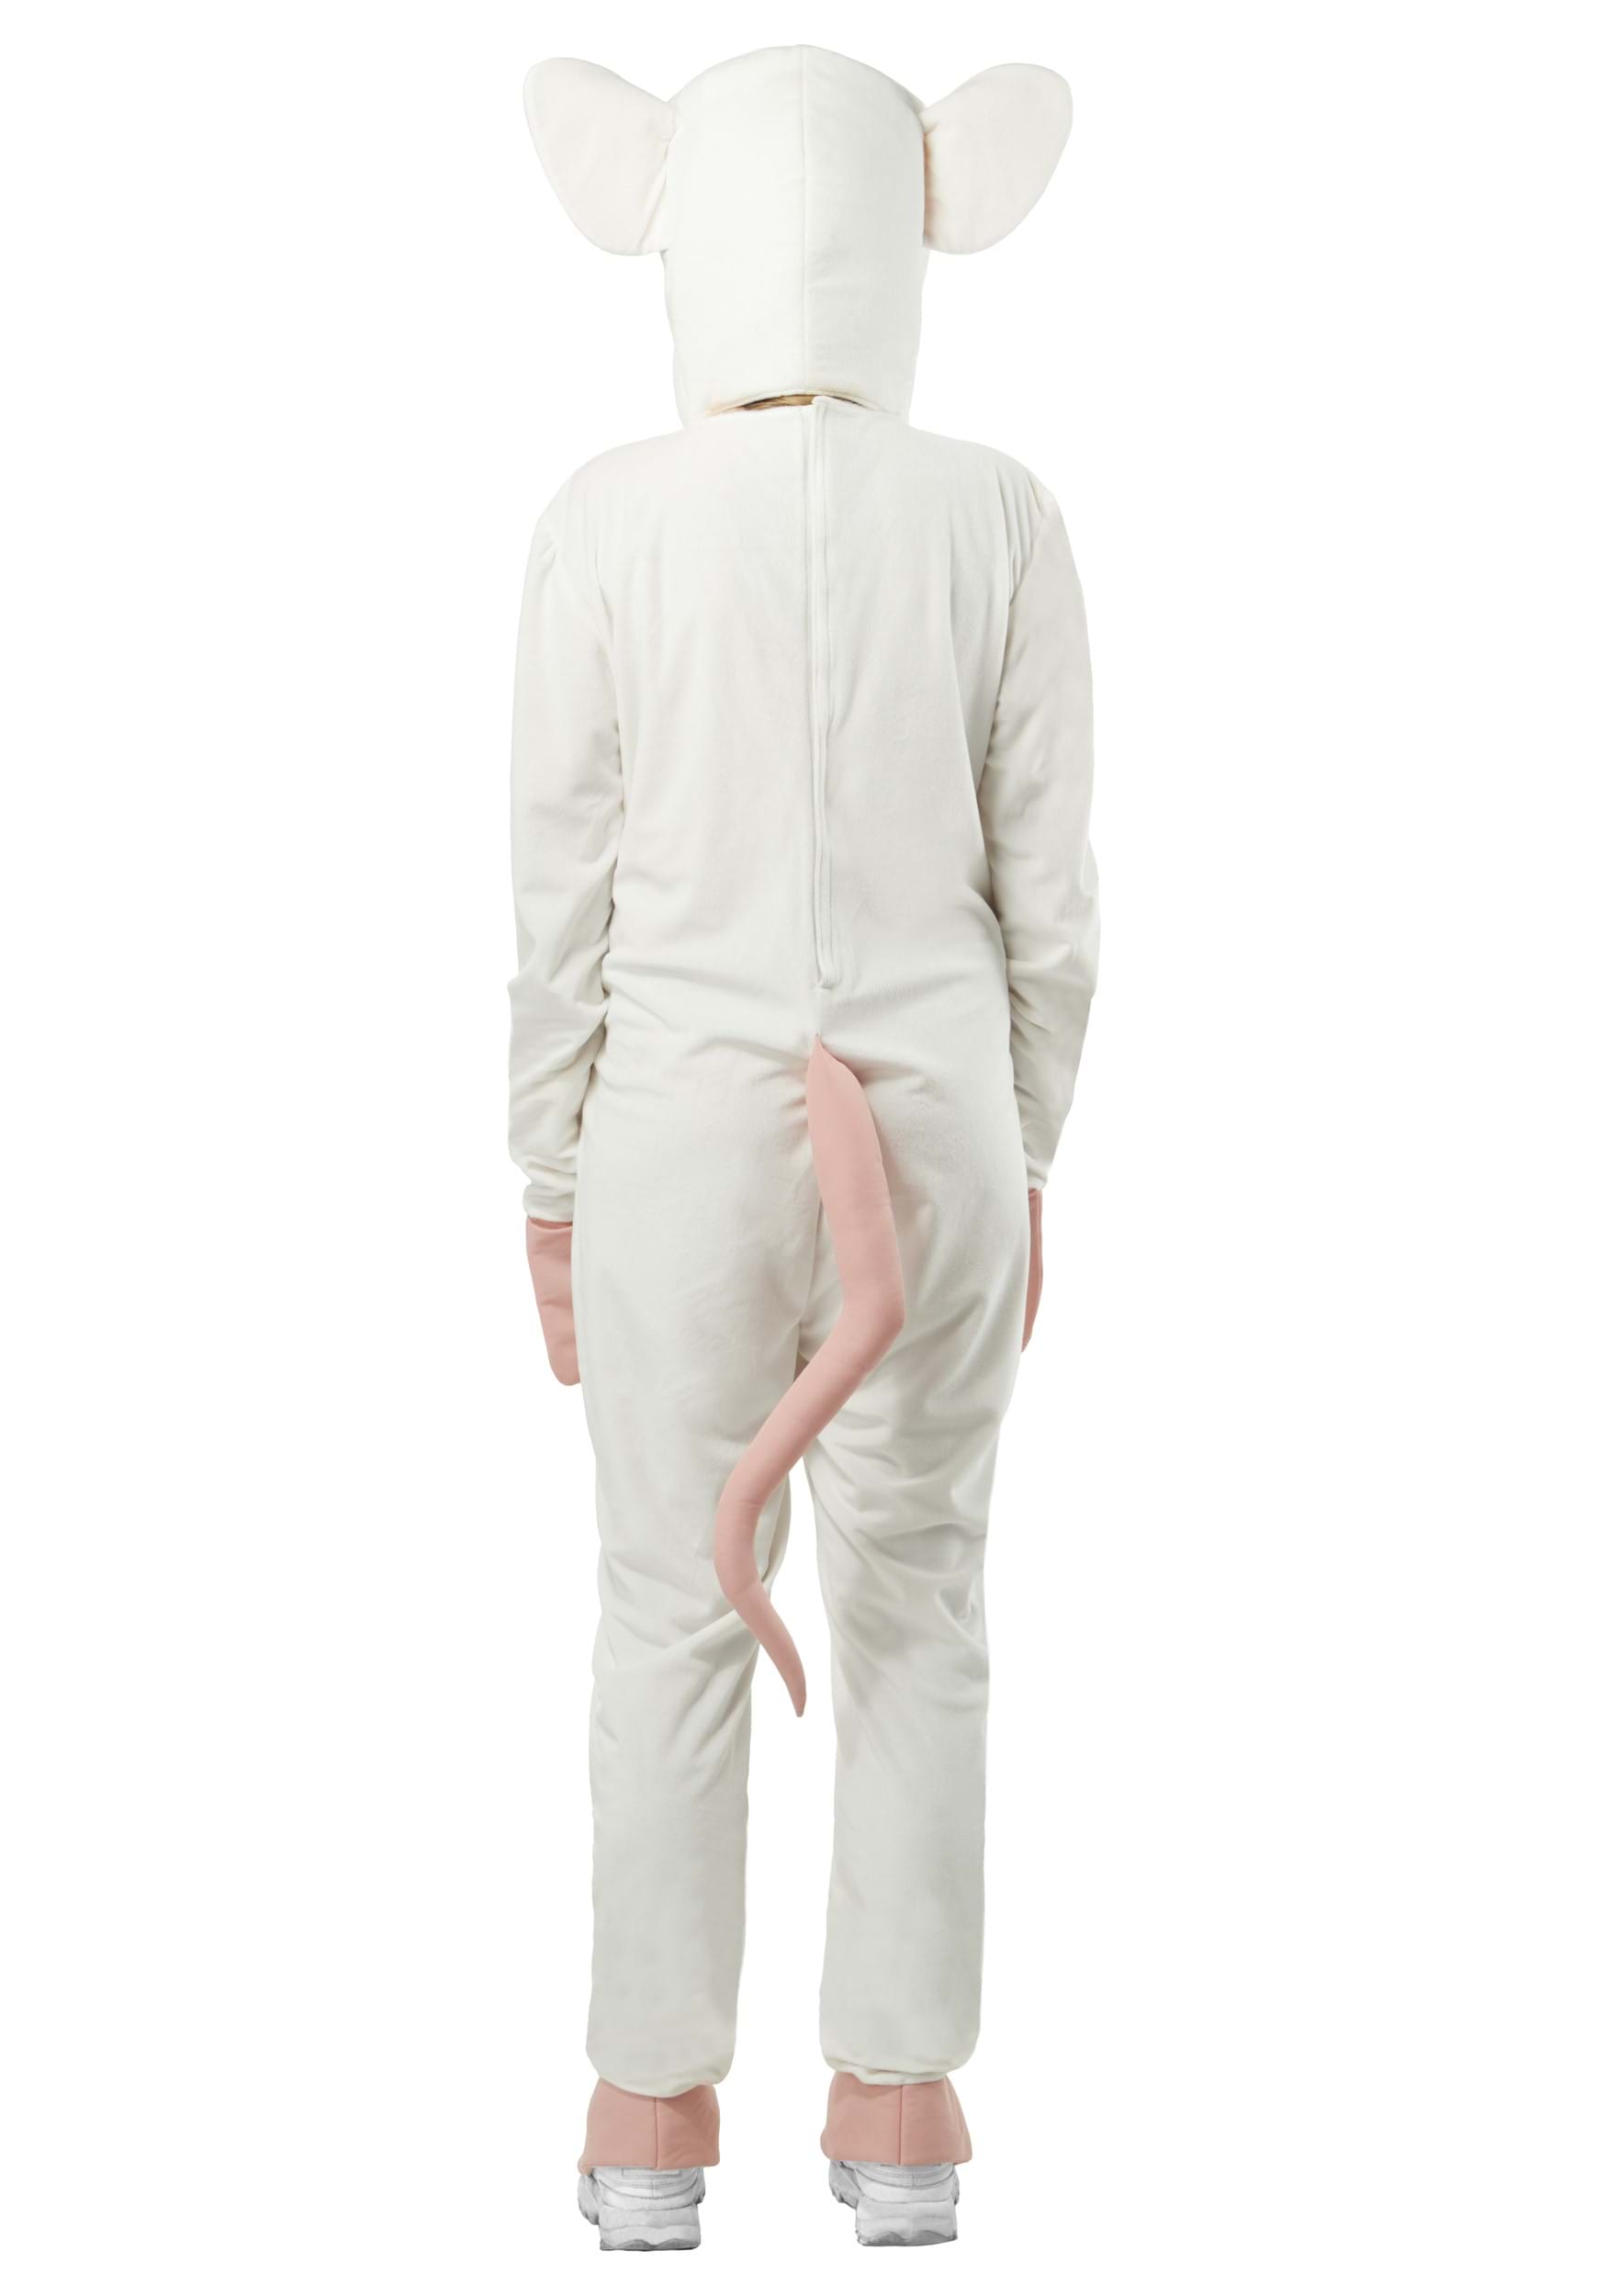 Adult Pinky And The Brain Brain Fancy Dress Costume